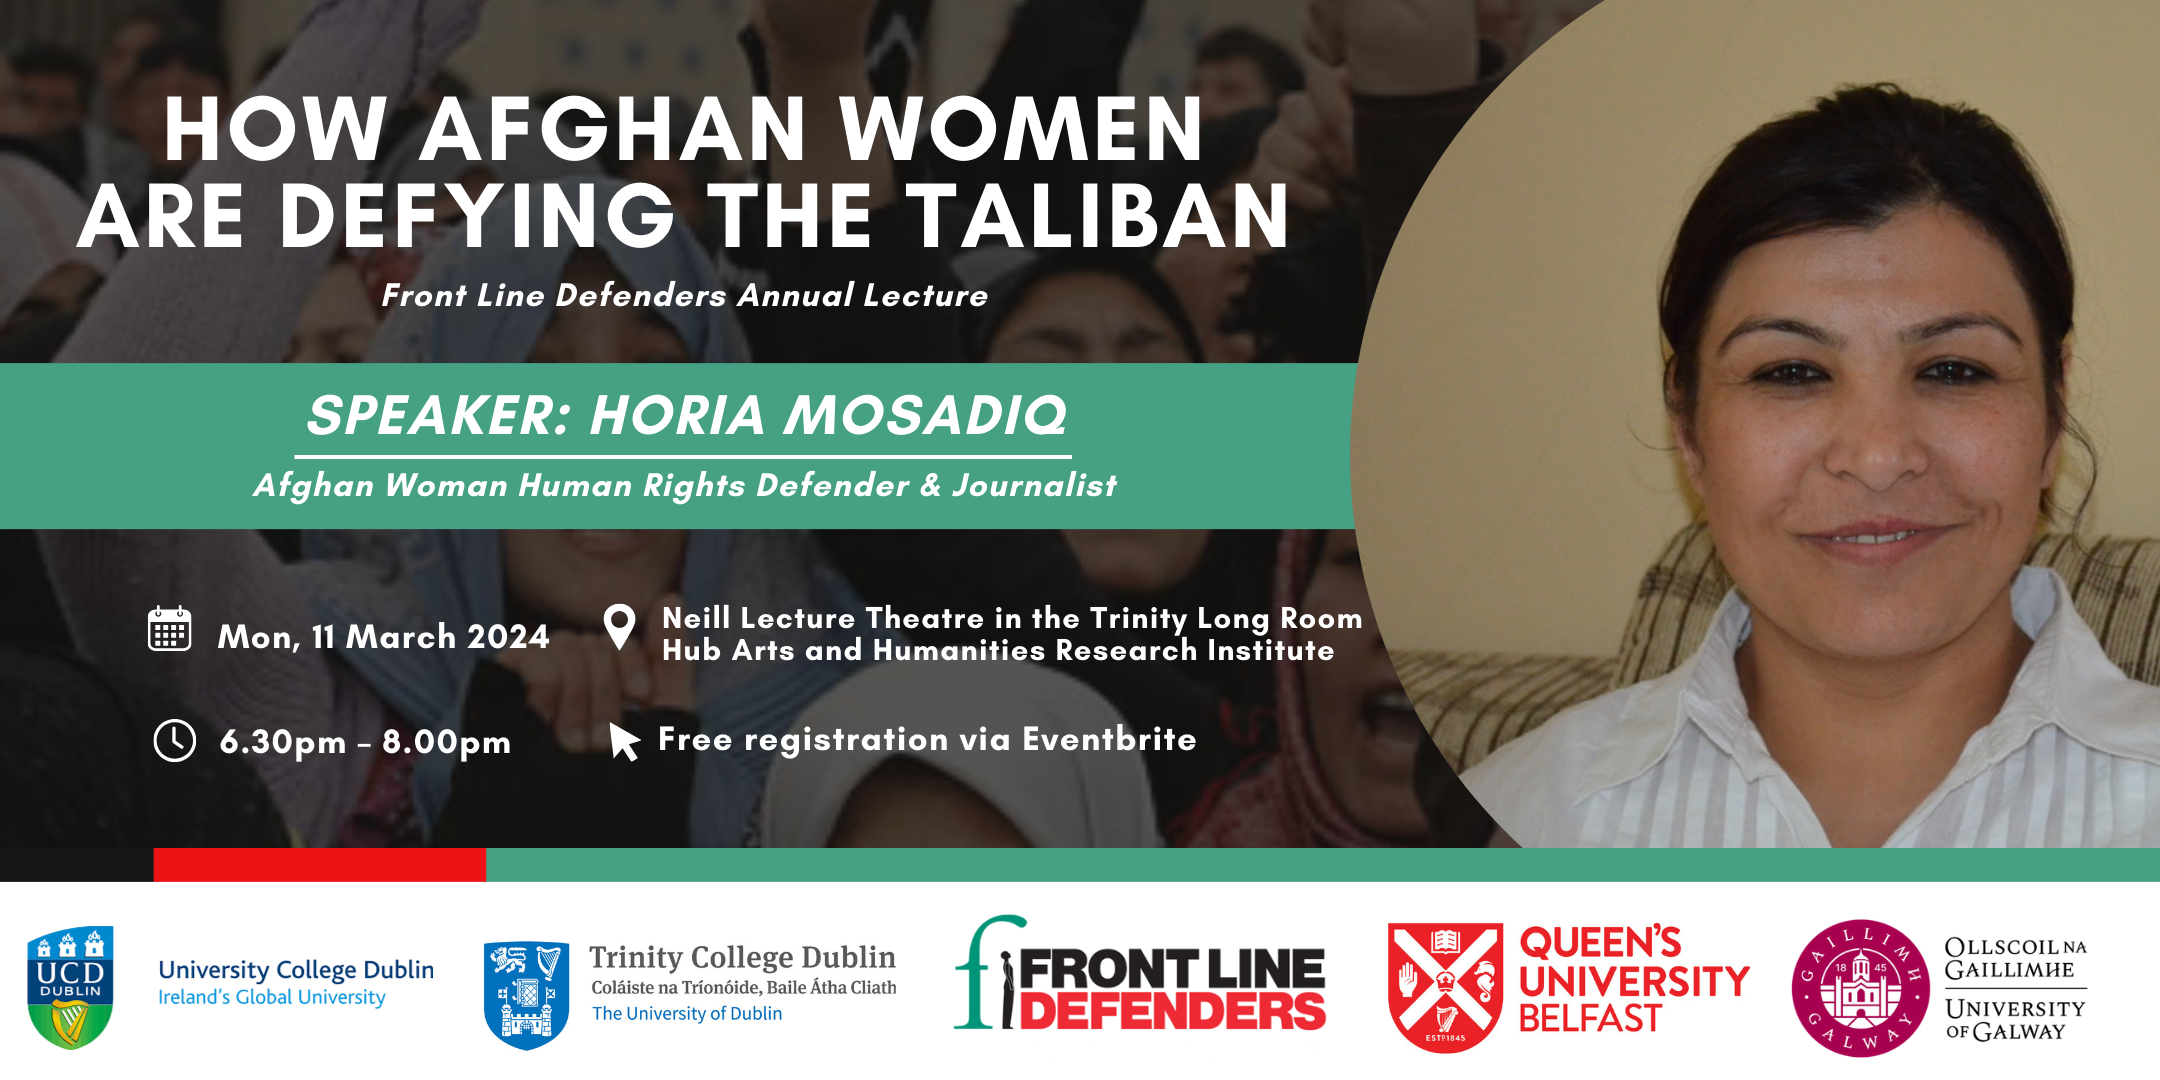 Frontline Defenders Annual Lecture 2024 - How Afgan Women are defying the Taliban